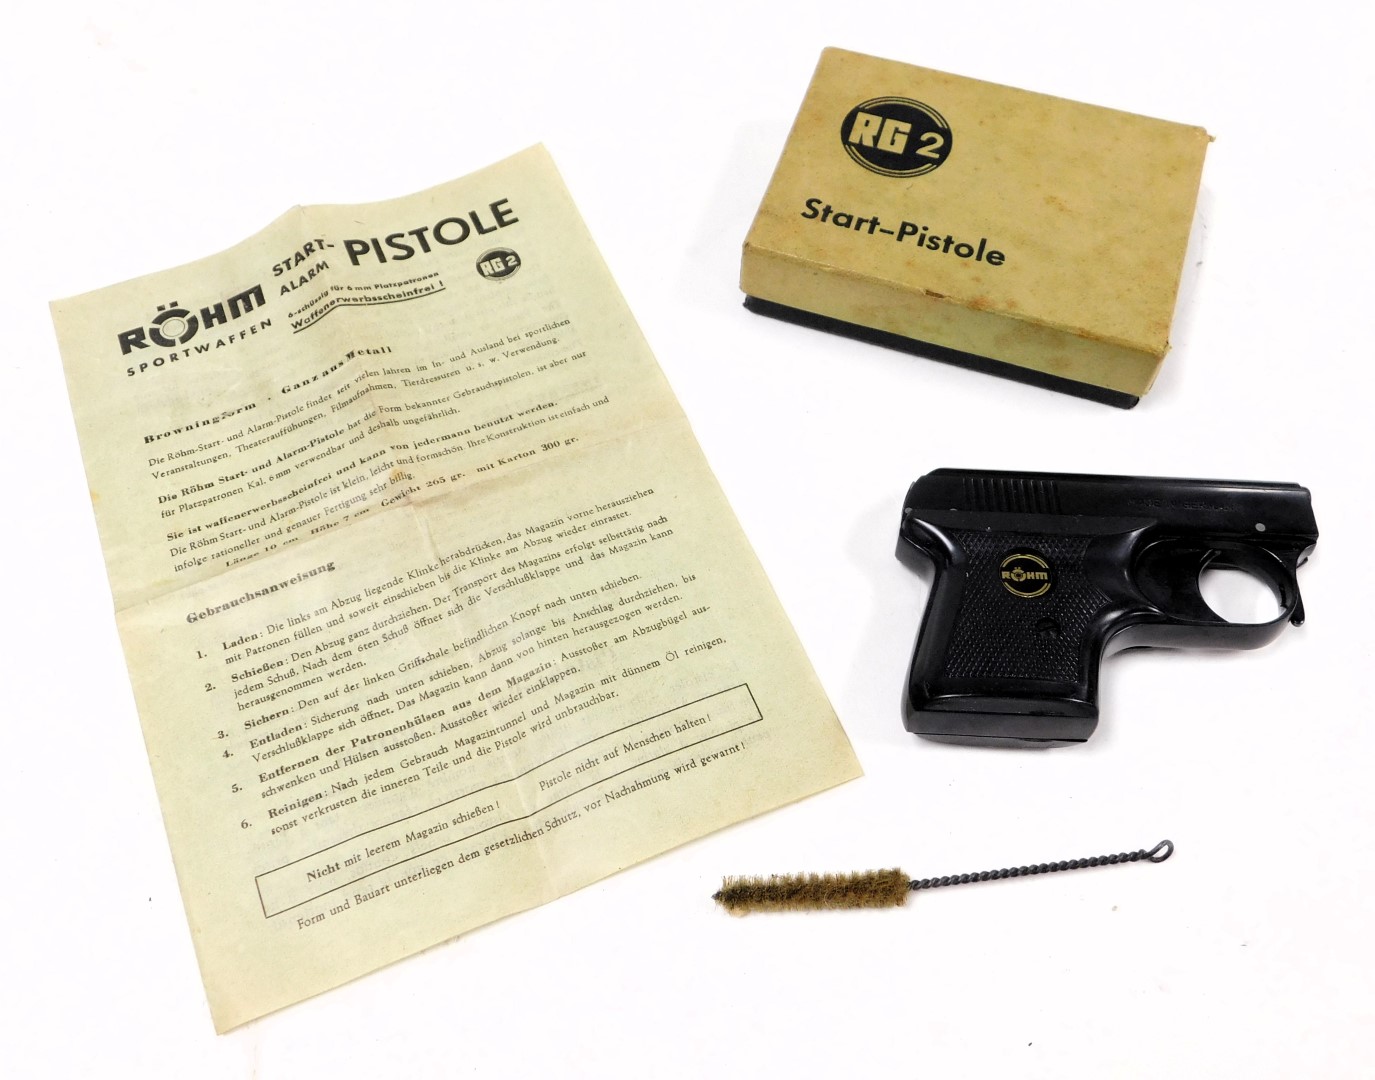 A Rohm sporting starting pistol RG2, boxed with instructions. - Image 5 of 5